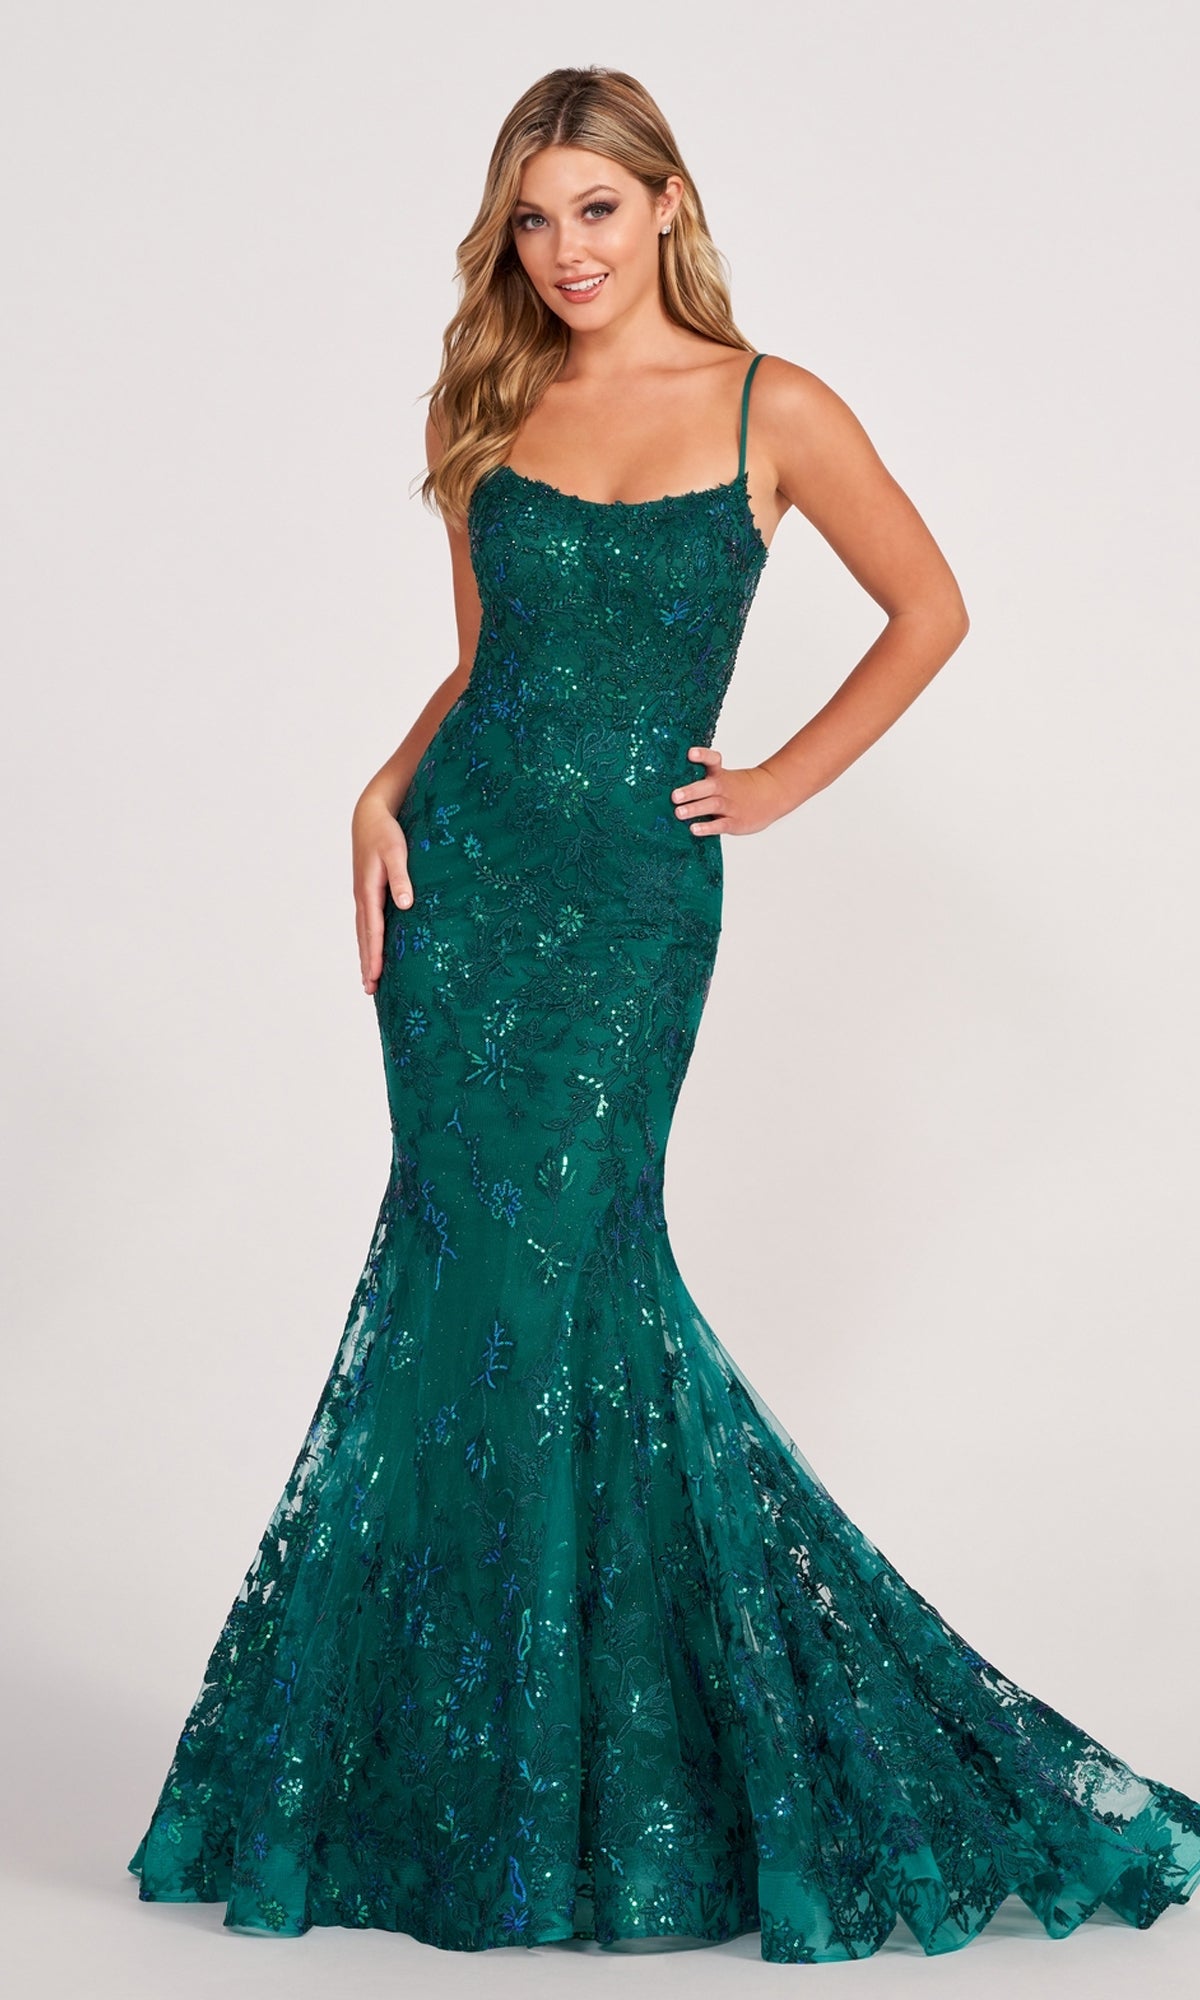 Ellie Wilde Embroidered-Lace Mermaid Prom Dress